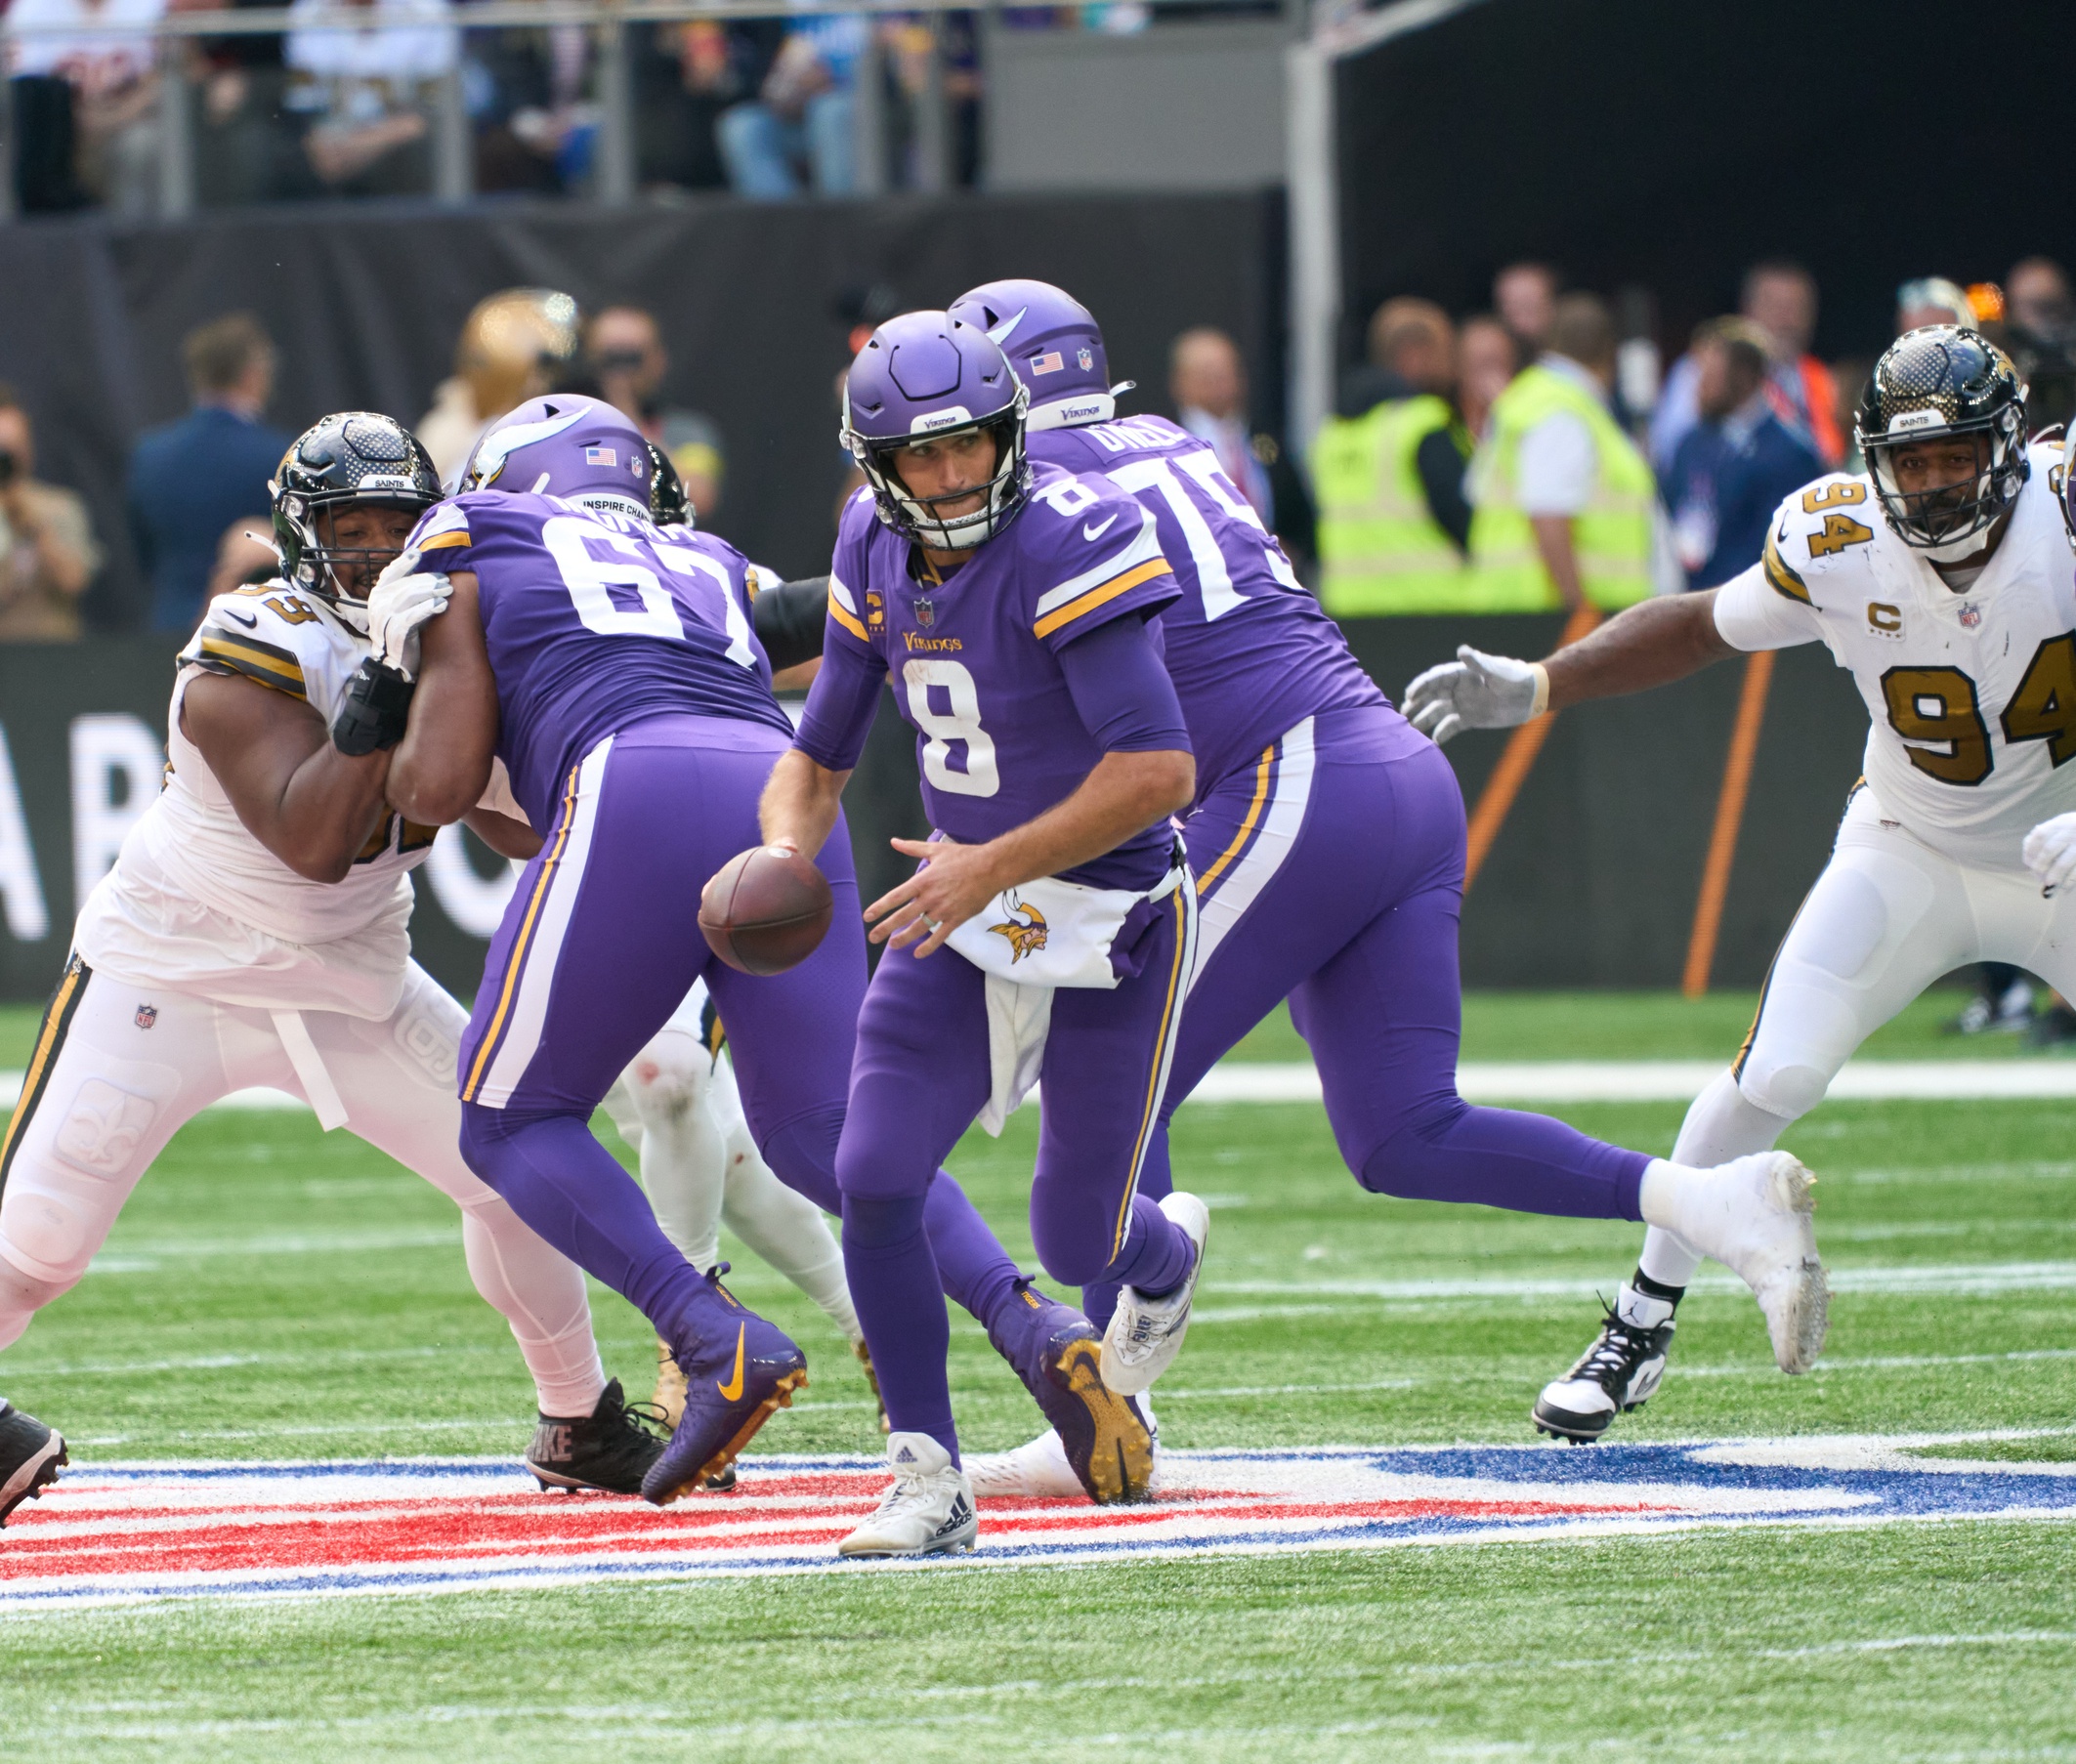 Minnesota Vikings: How Much Confidence Do You Have?